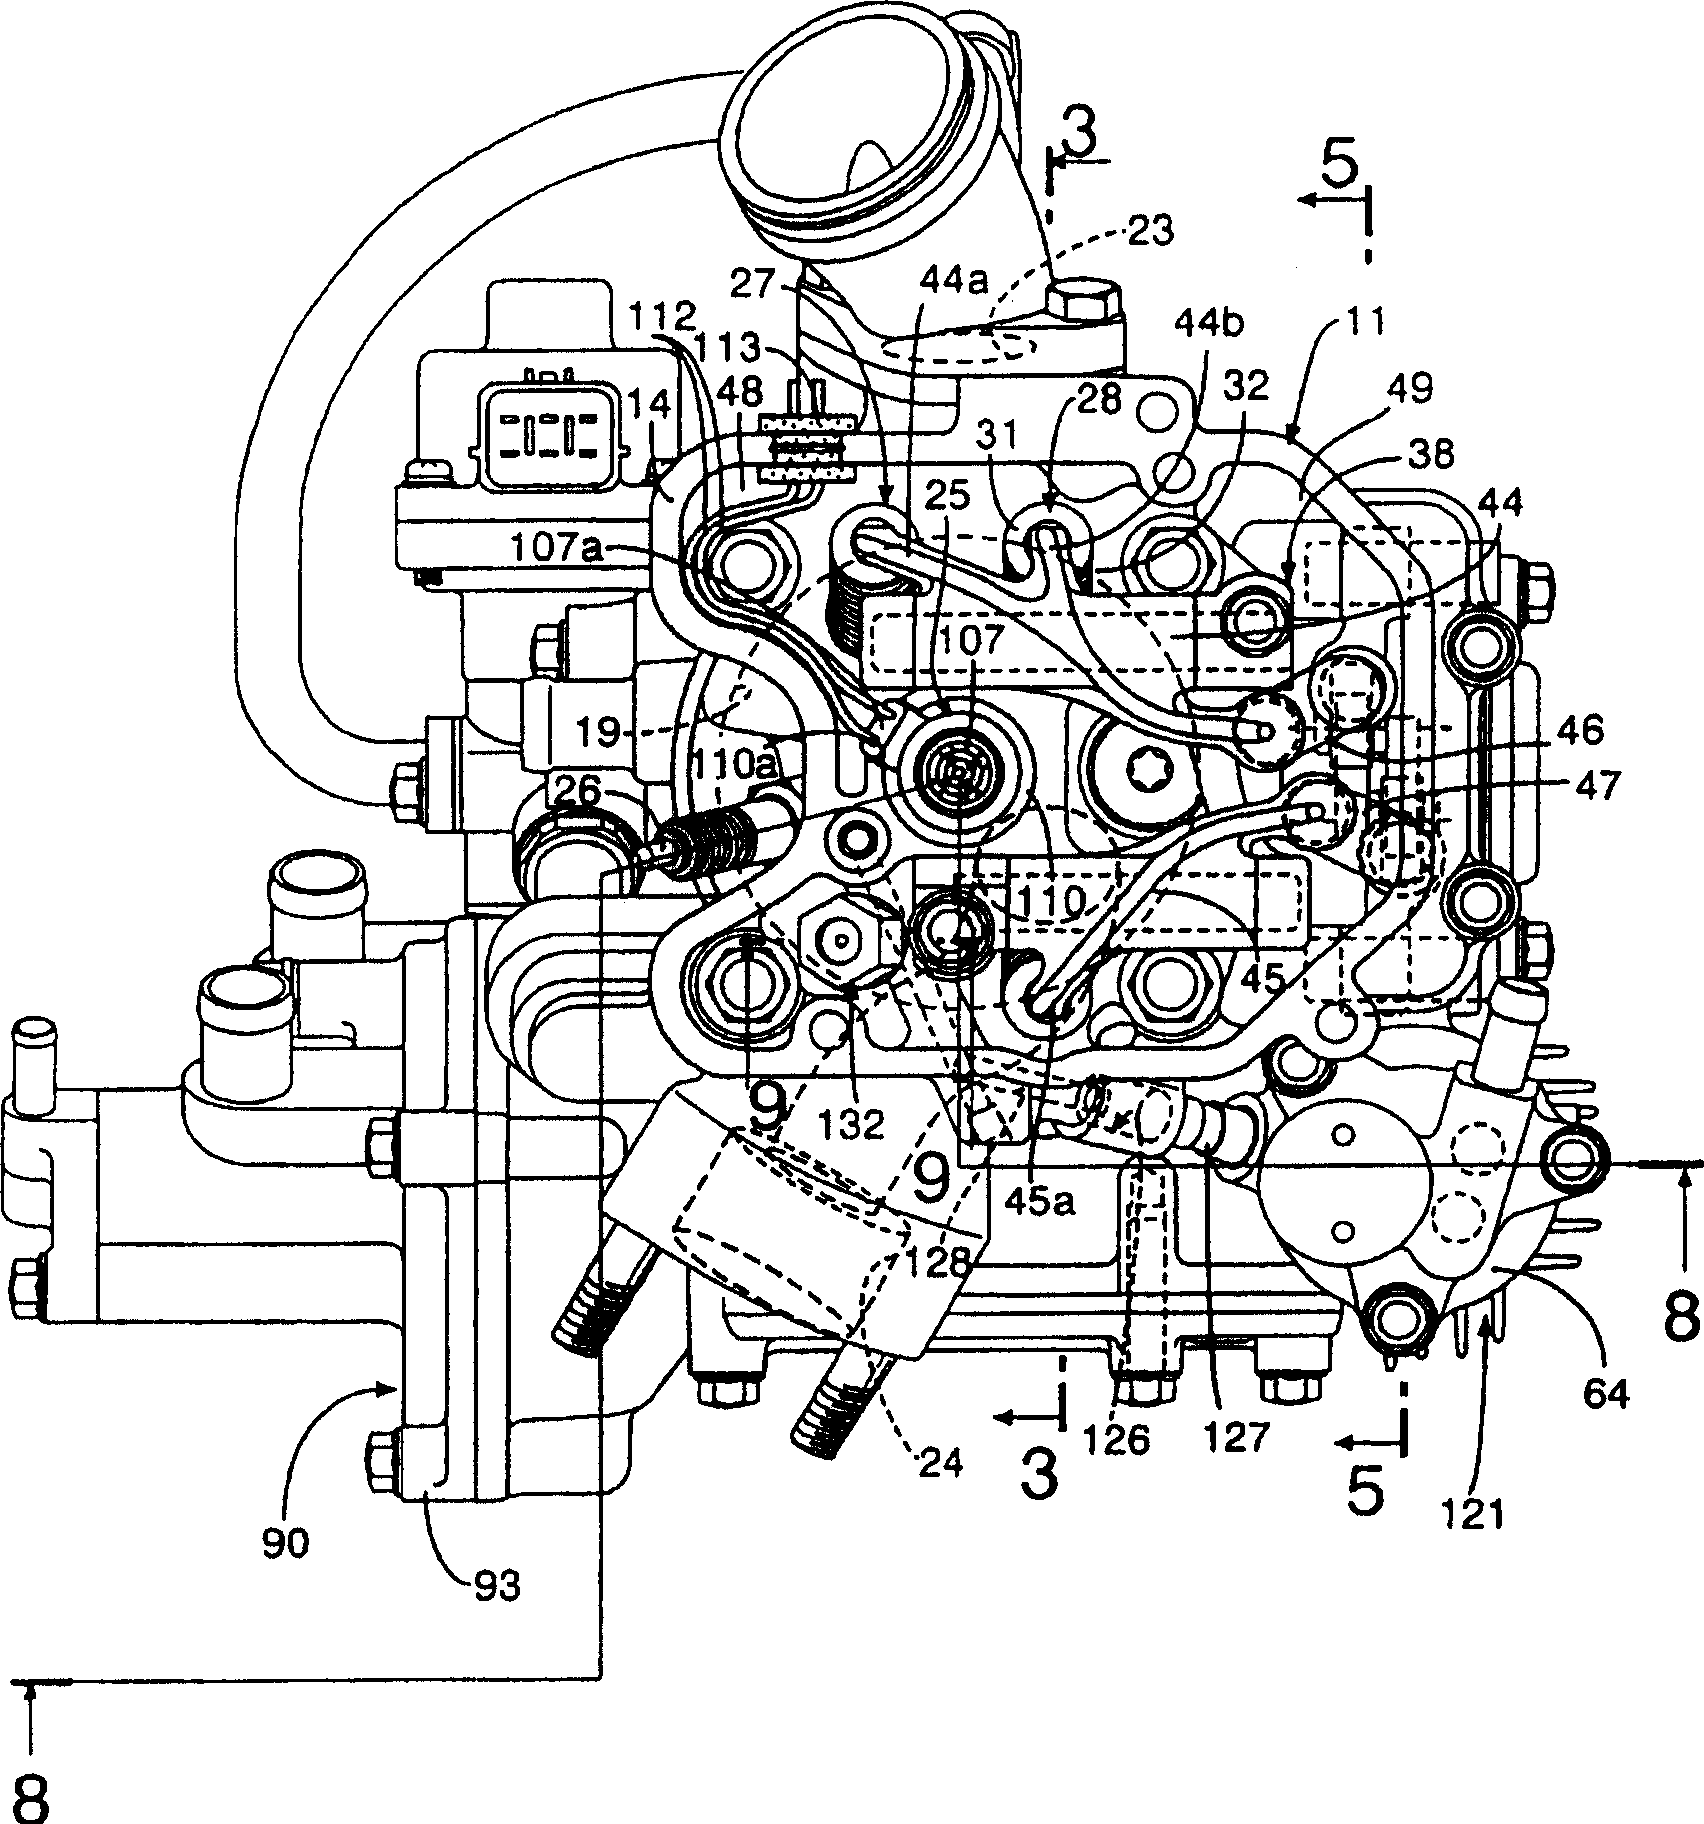 Fuel jetter of engine